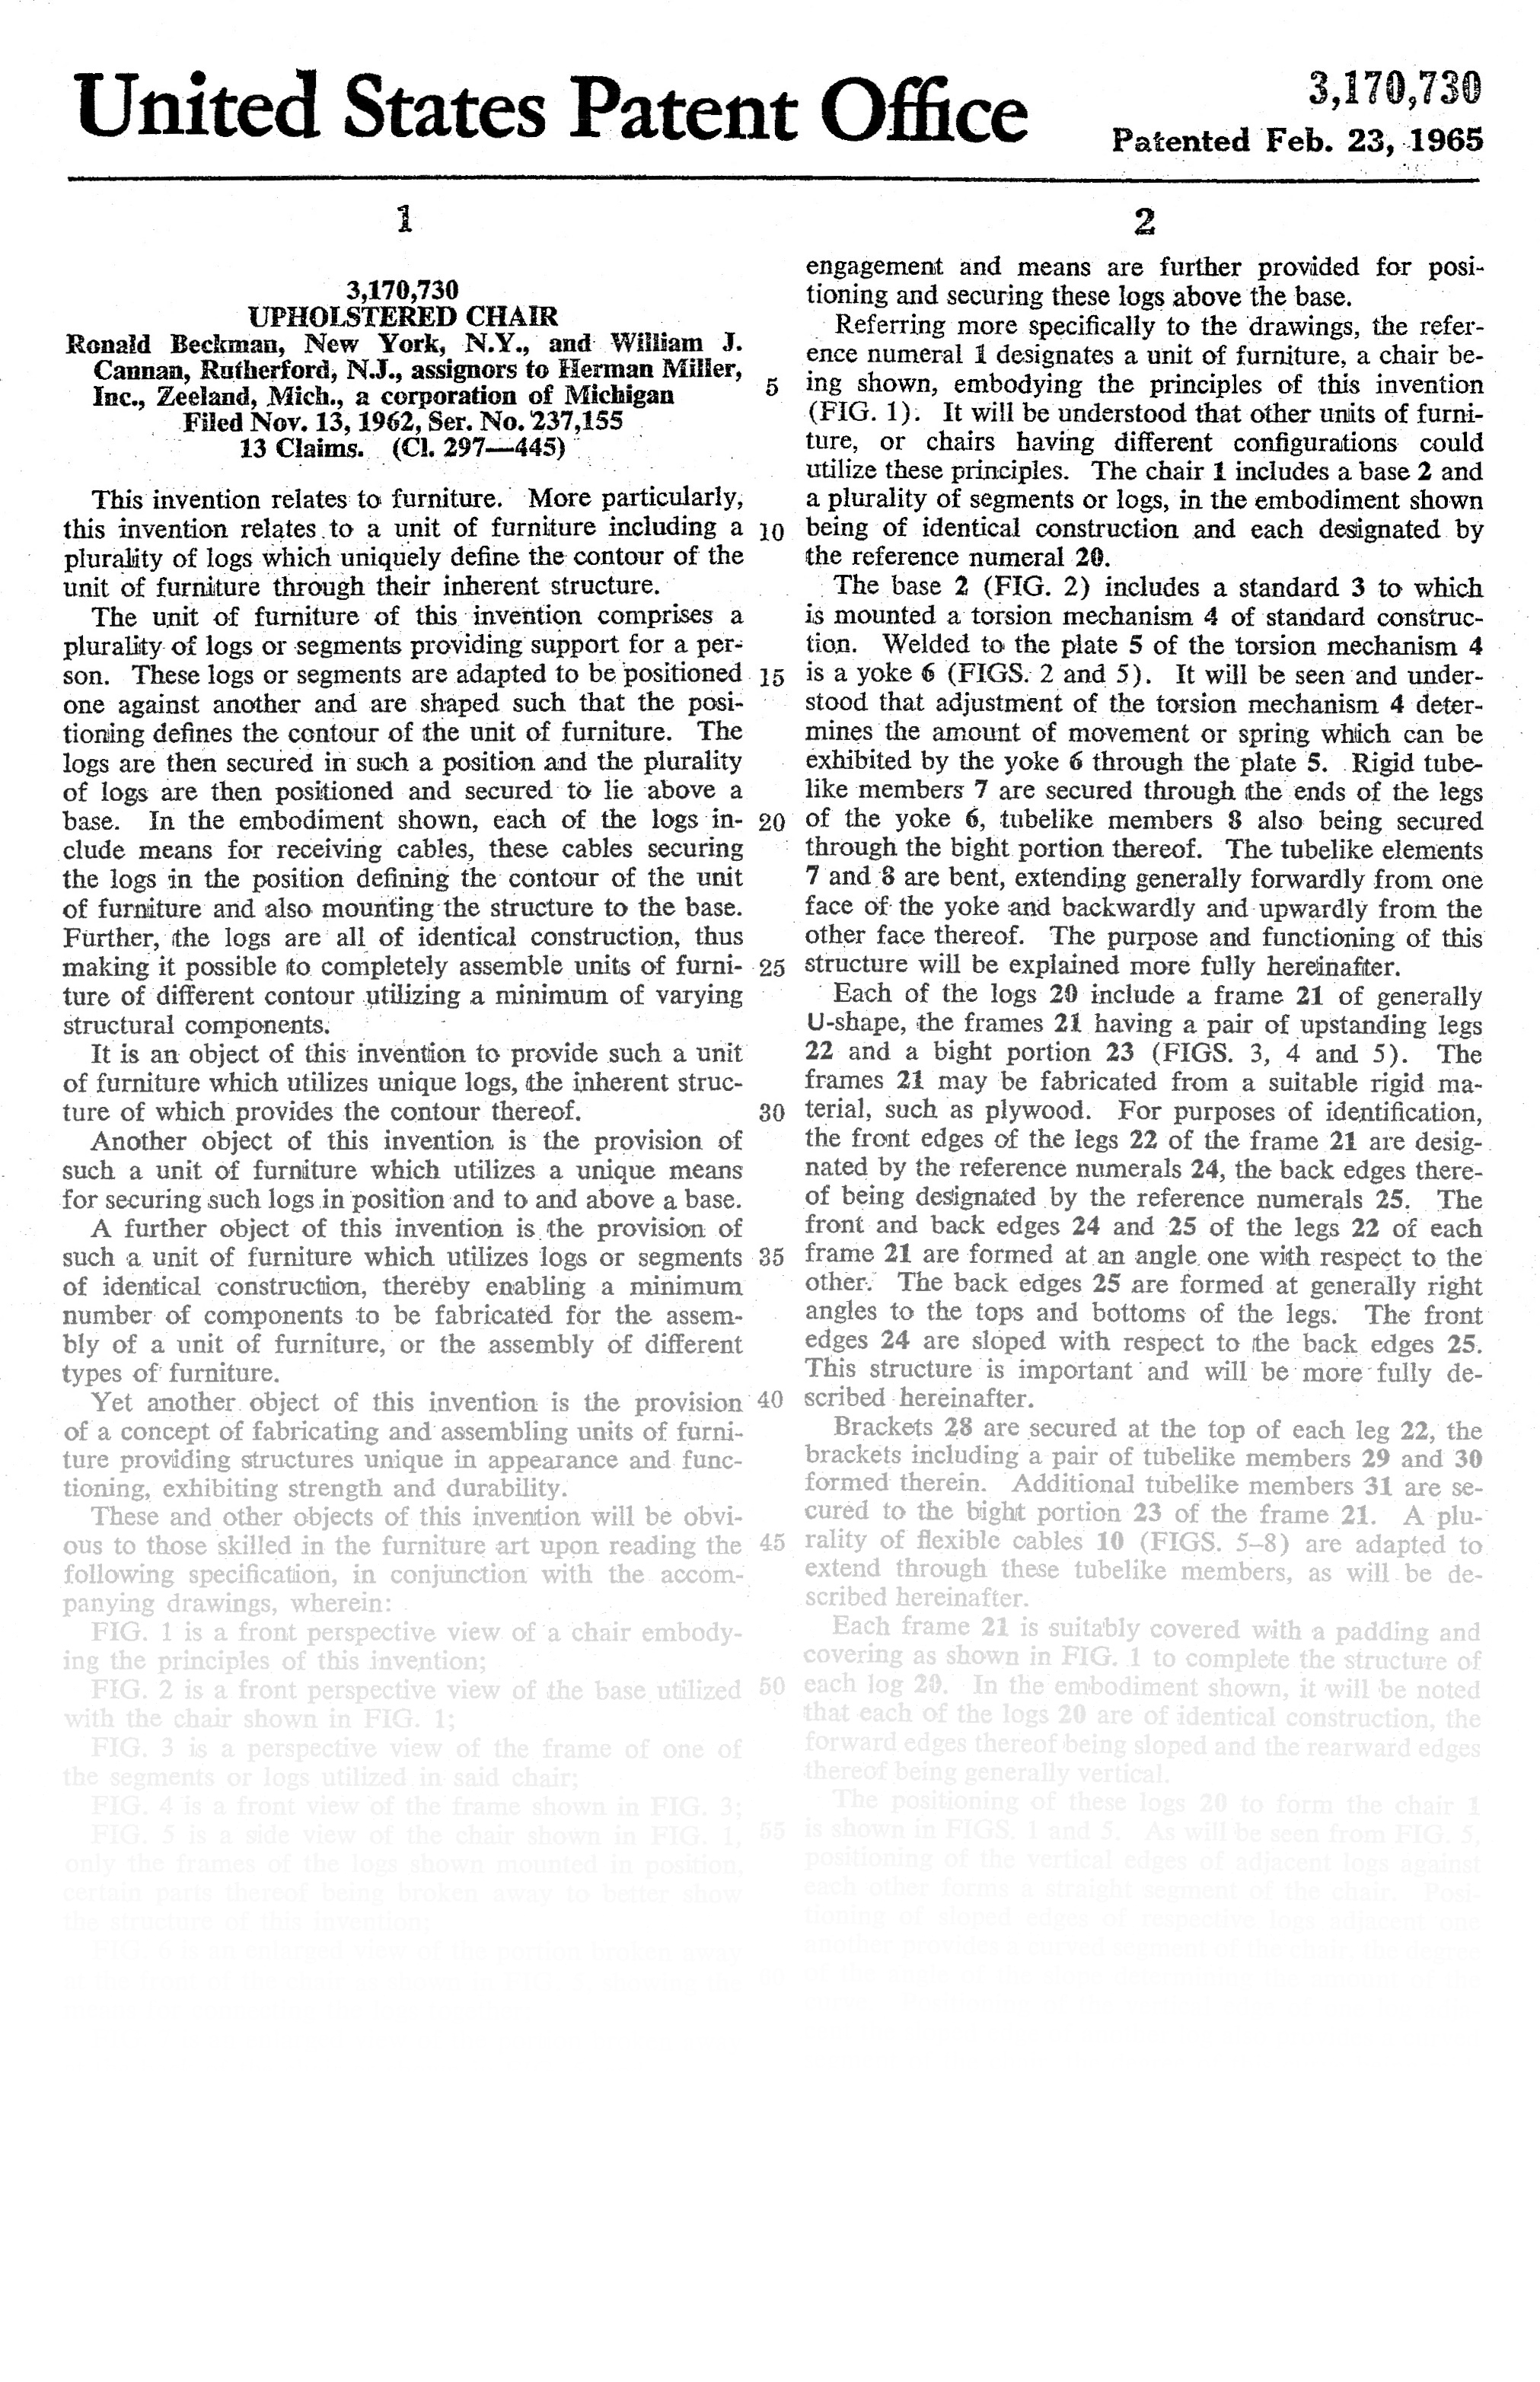 Text page detailing patent from the US Patent Office